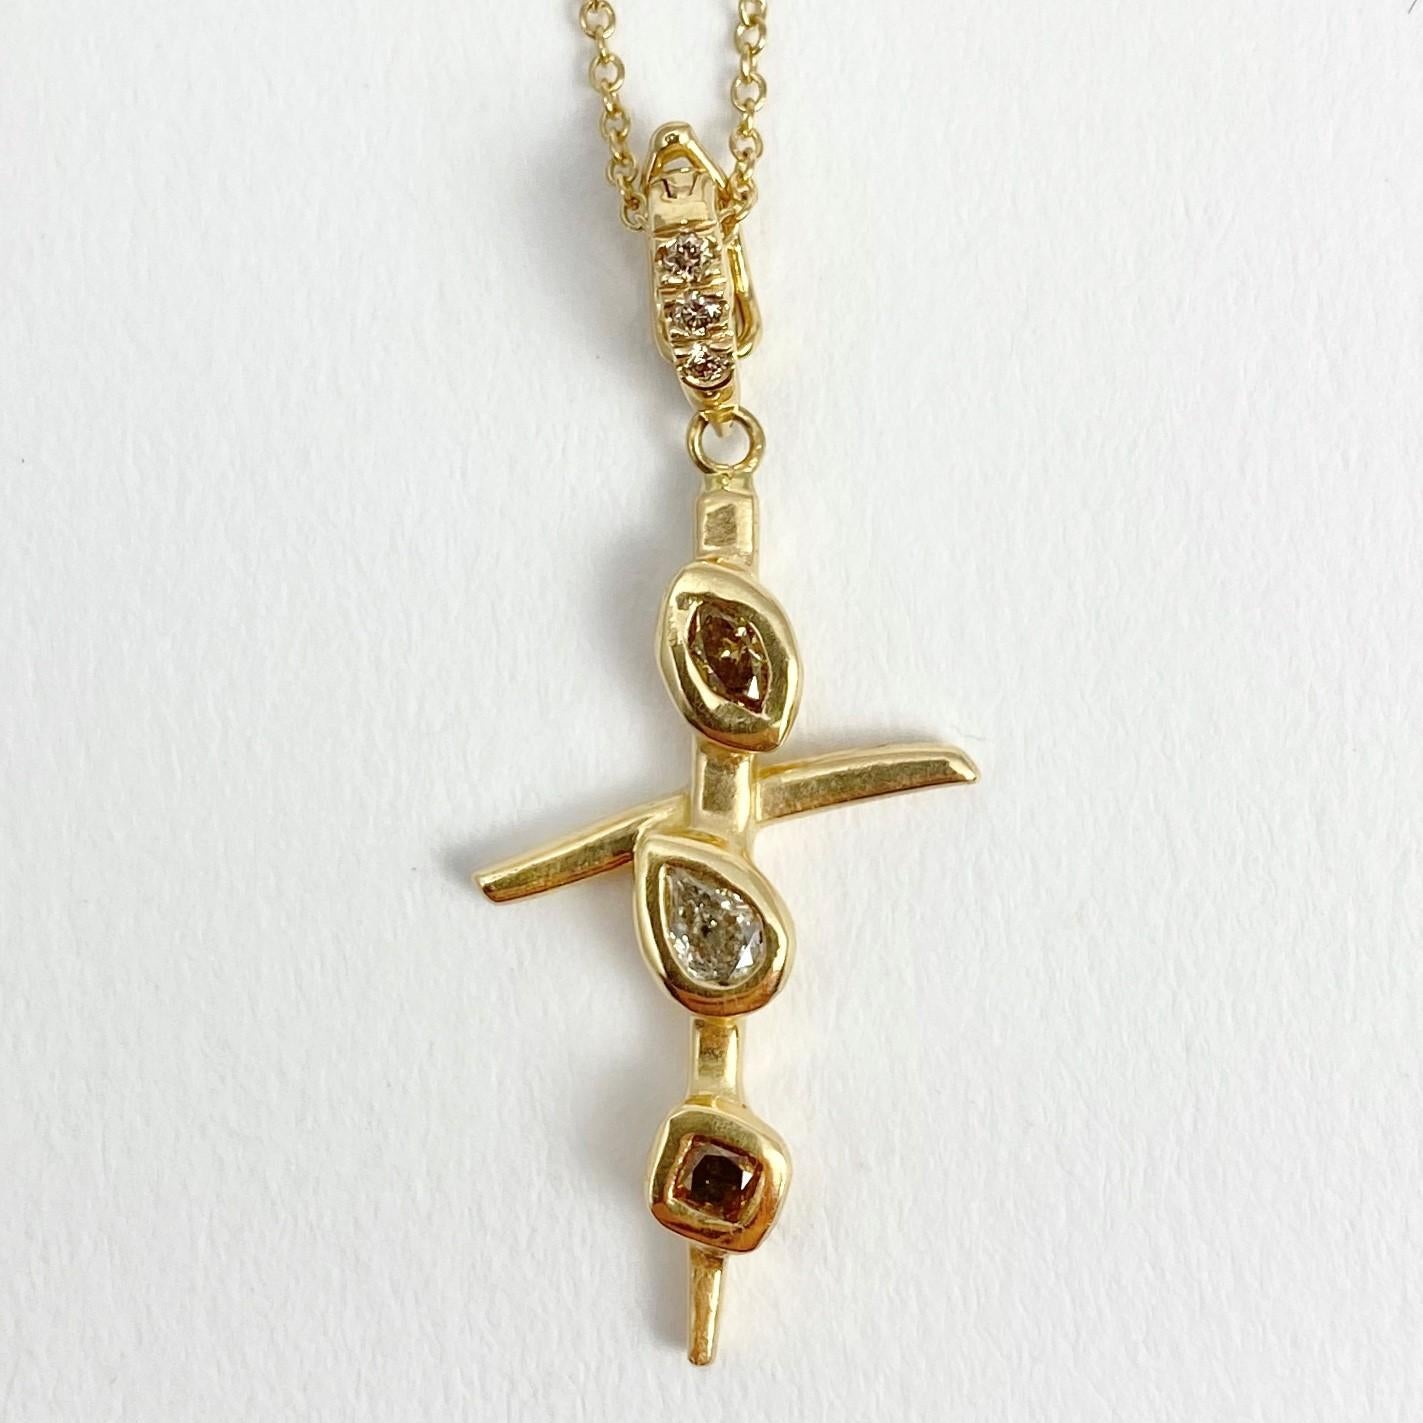 The Crossroads Cross pendant is hand-made with 18-karat recycled yellow gold, and features three bezel set, natural colored diamonds (one marquise shape, one pear, and one cushion); and three round brilliant, champagne accent diamonds set in the